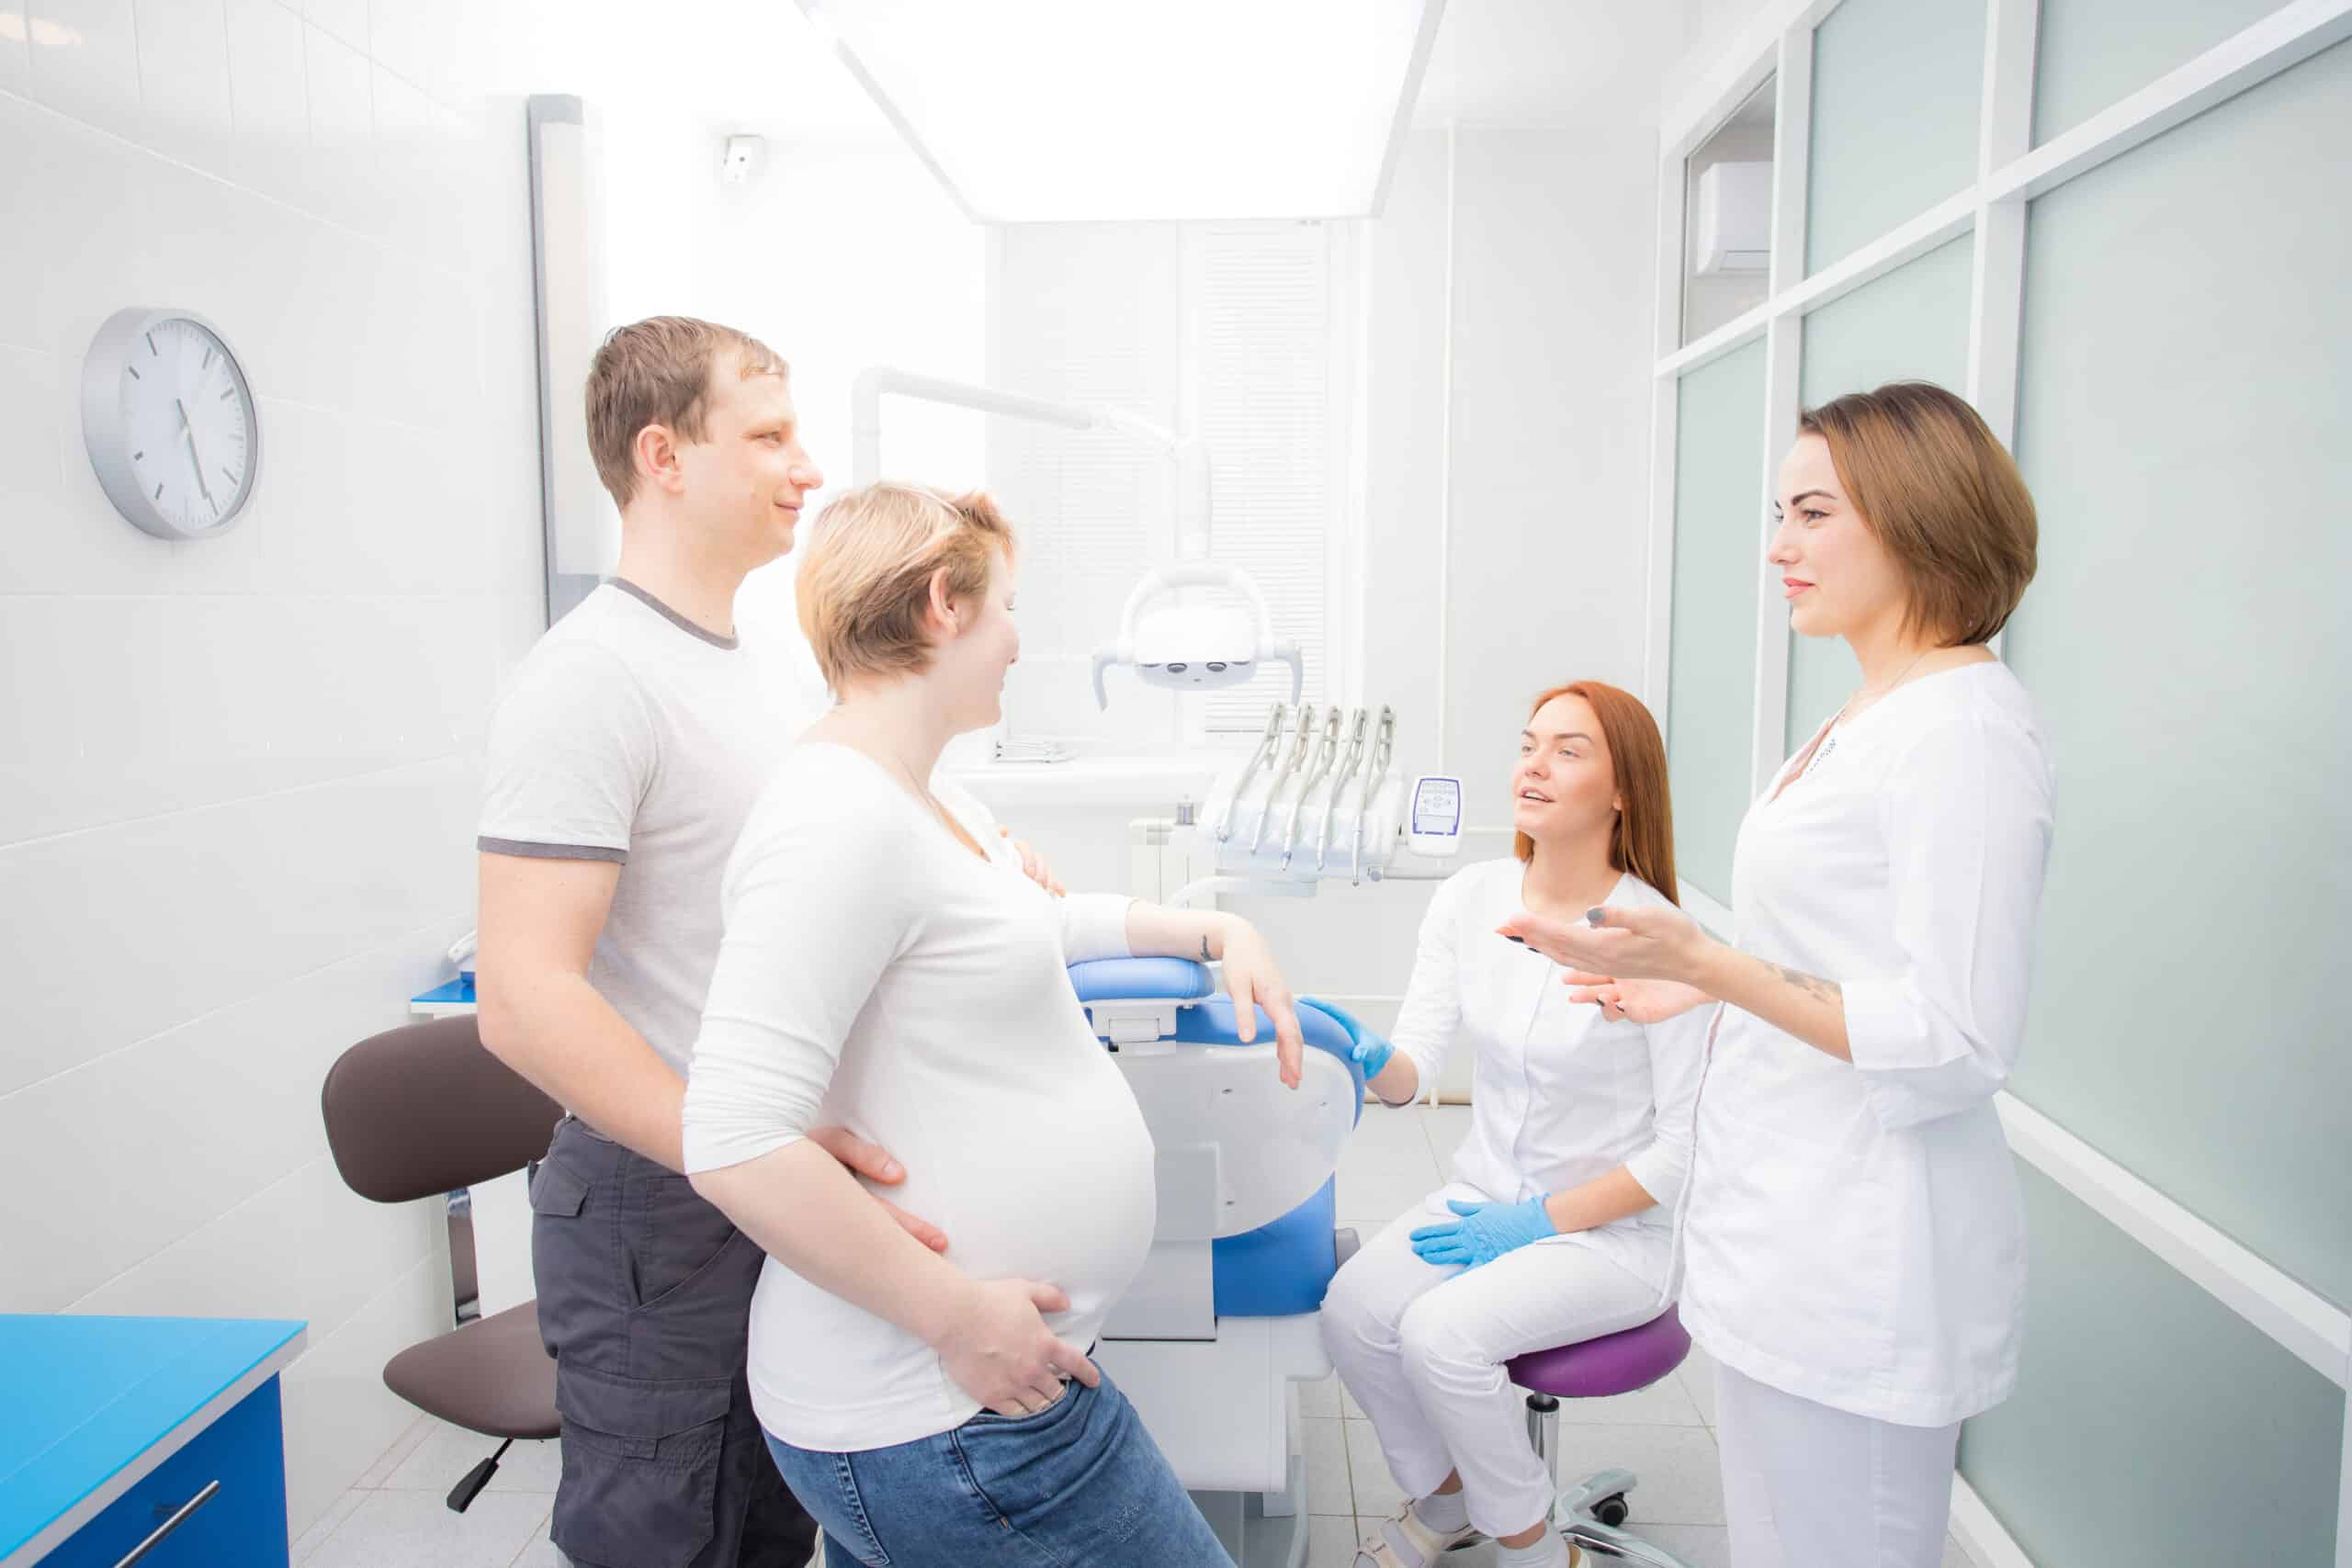 pregnant woman and her husband communicate with two young women dentists in a medical office